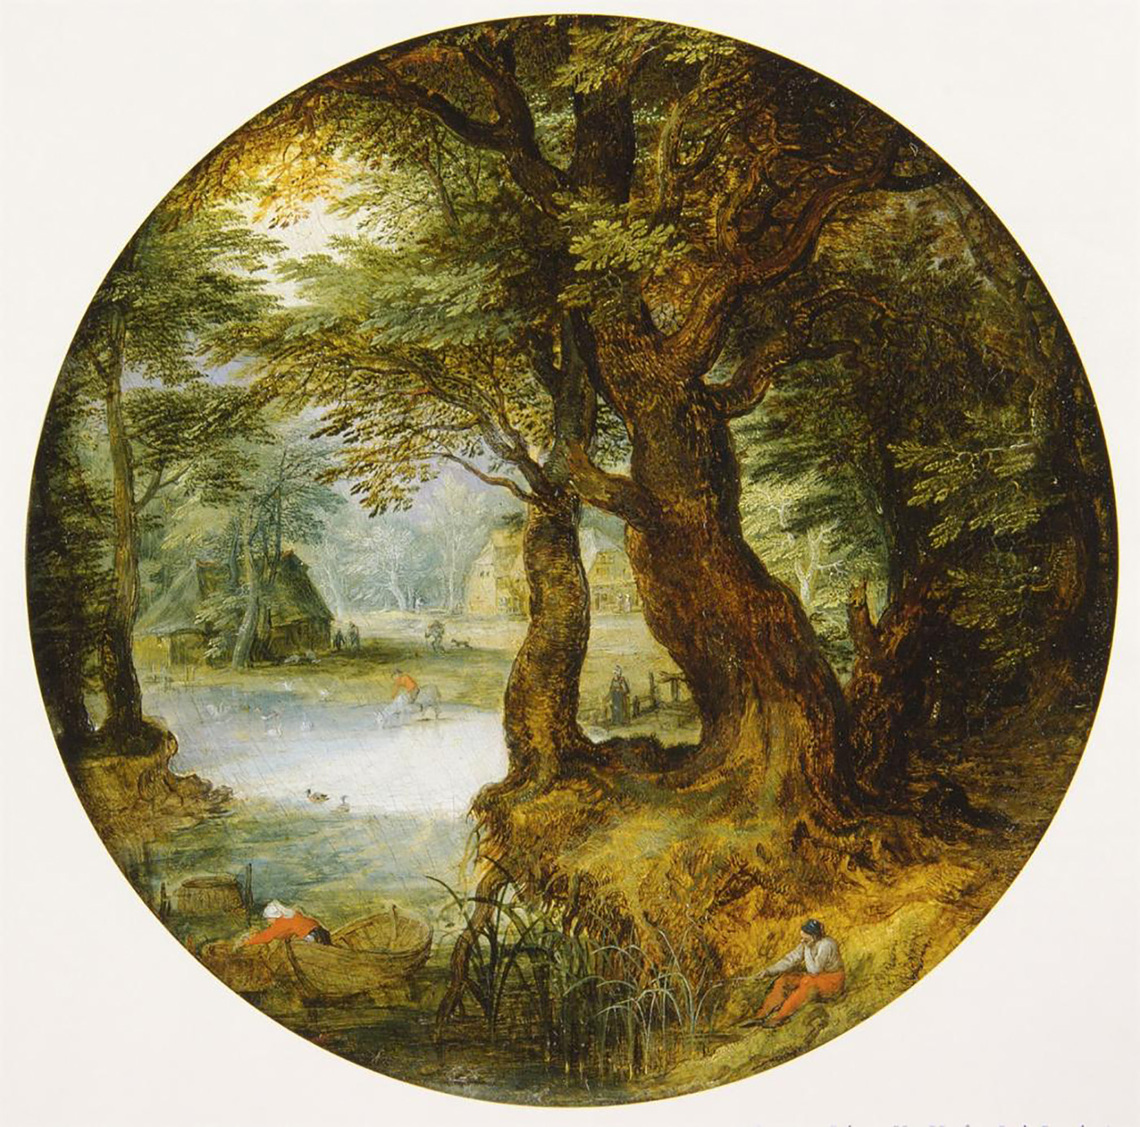 Forest Landscape with Angler